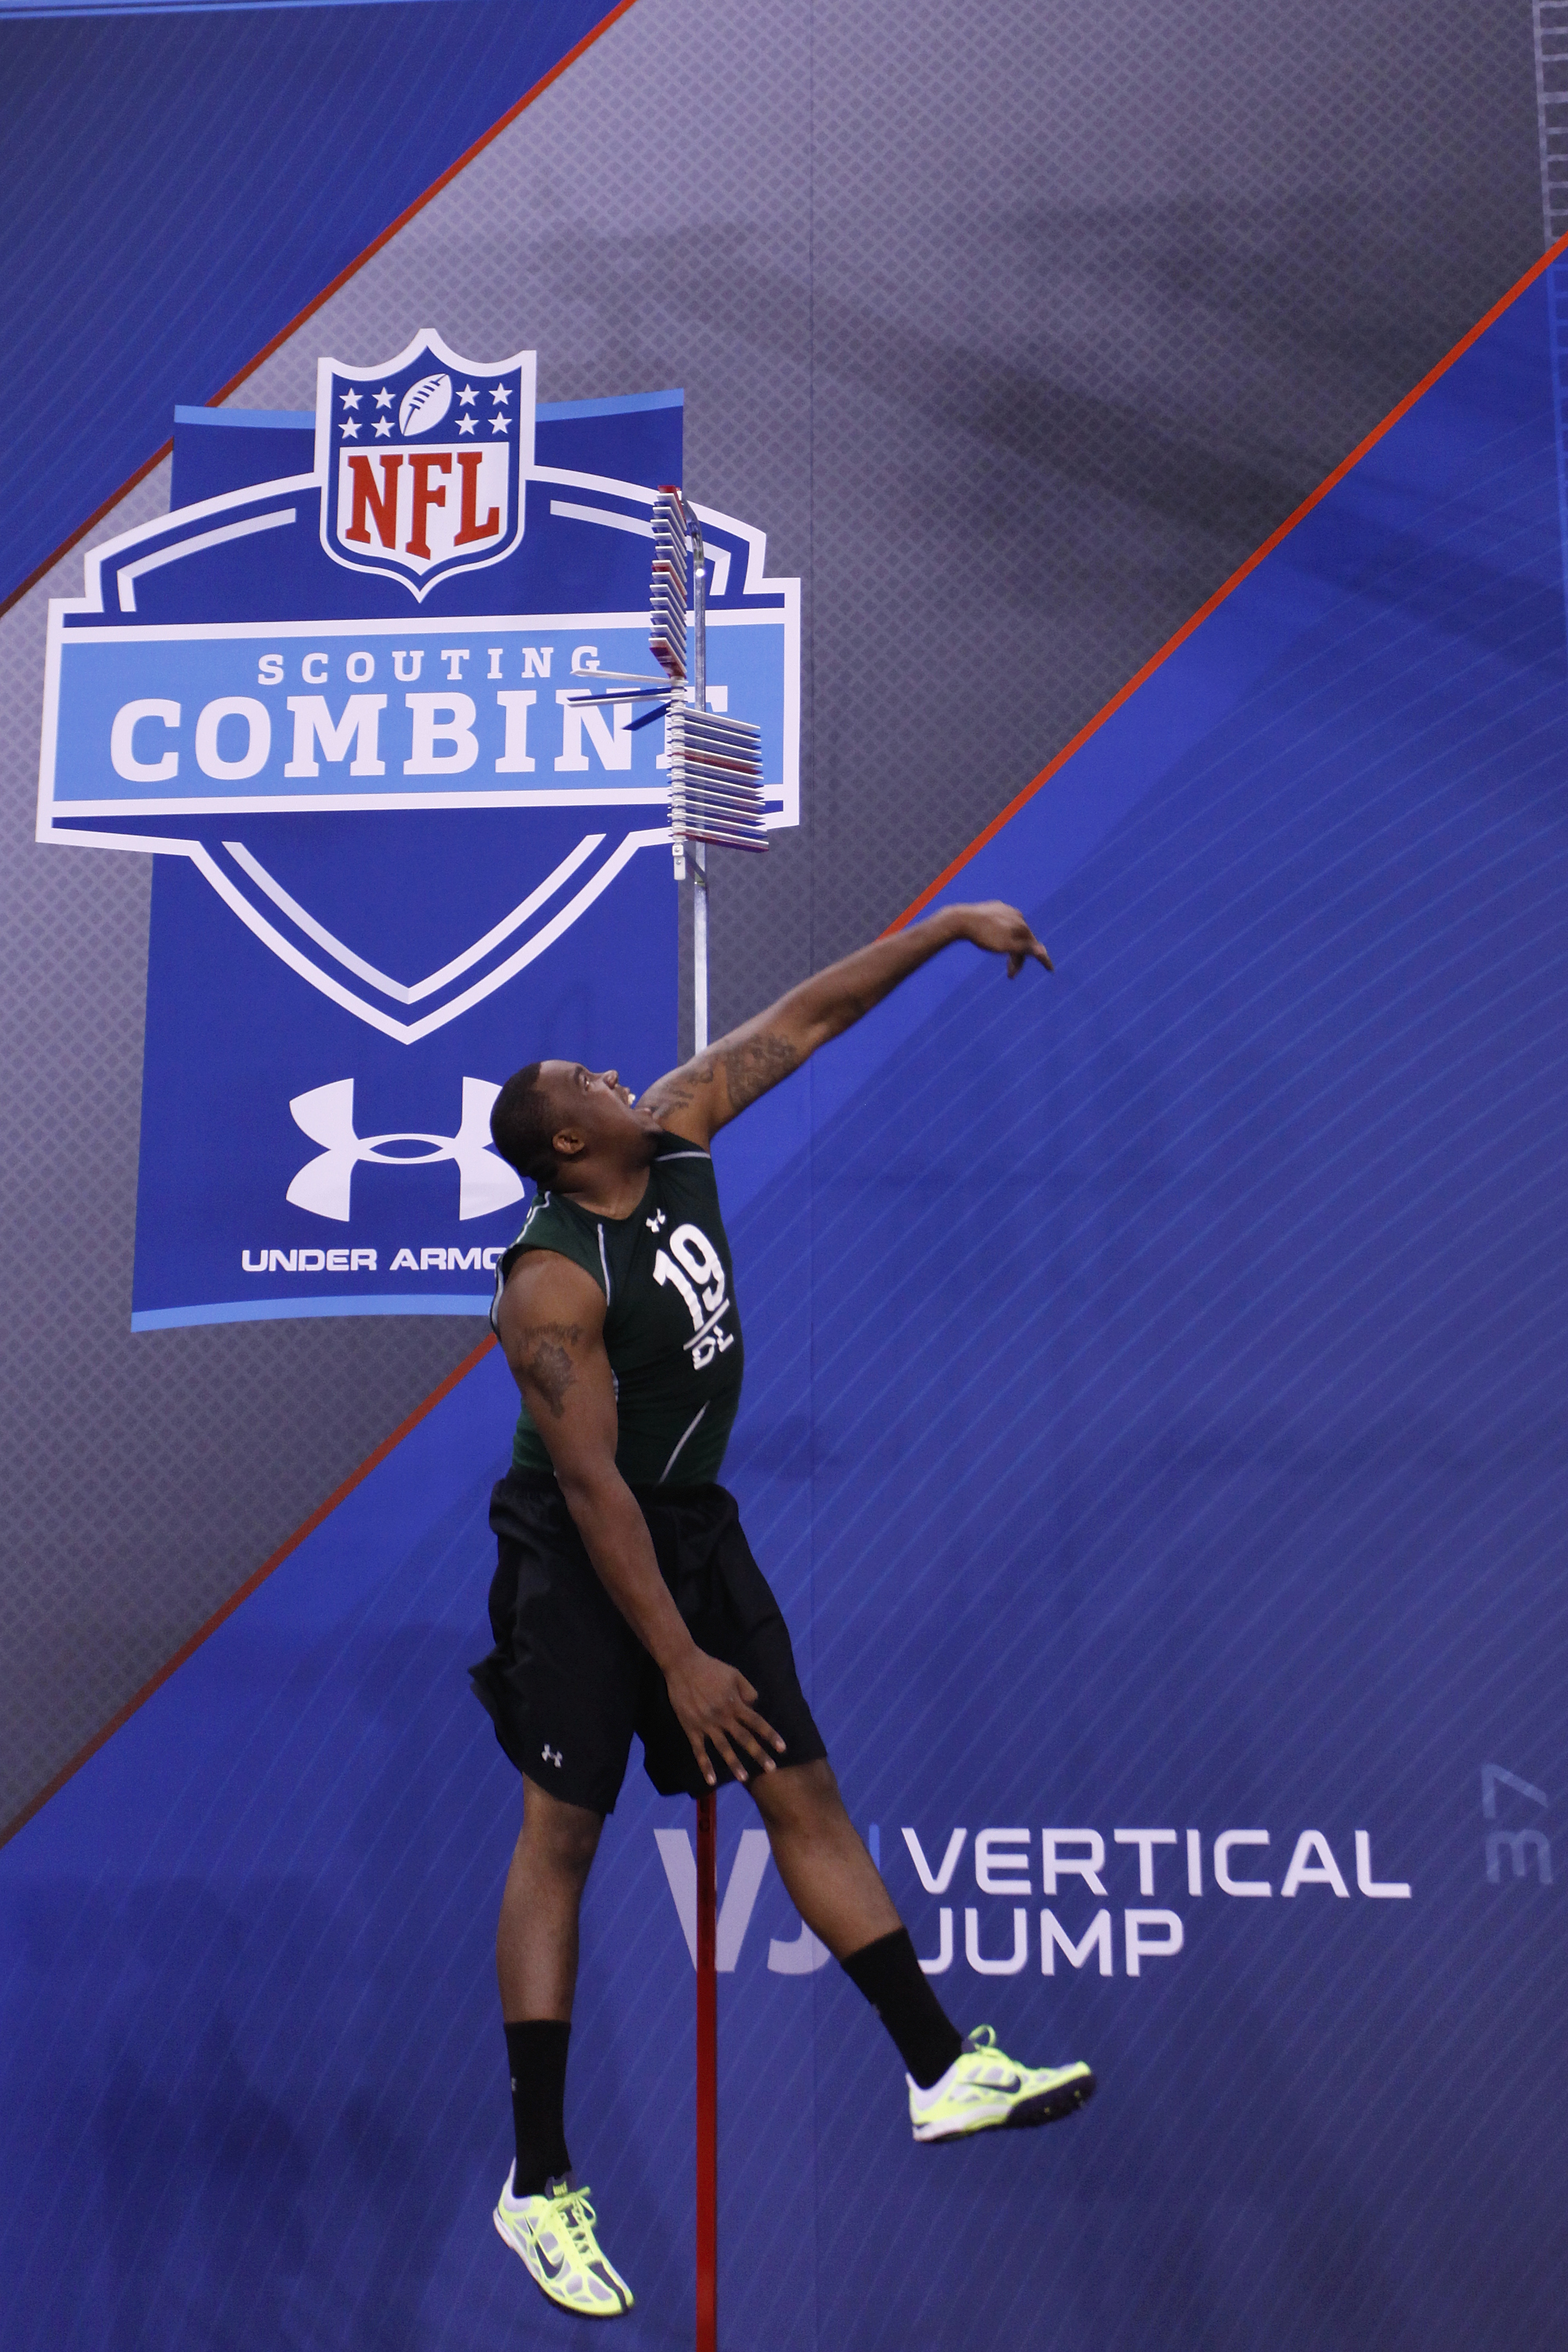 INDIANAPOLIS, IN - FEBRUARY 28:  Defensive lineman Nick Fairley of Auburn takes part in the vertical jump during the 2011 NFL Scouting Combine at Lucas Oil Stadium on February 28, 2011 in Indianapolis, Indiana. (Photo by Joe Robbins/Getty Images)